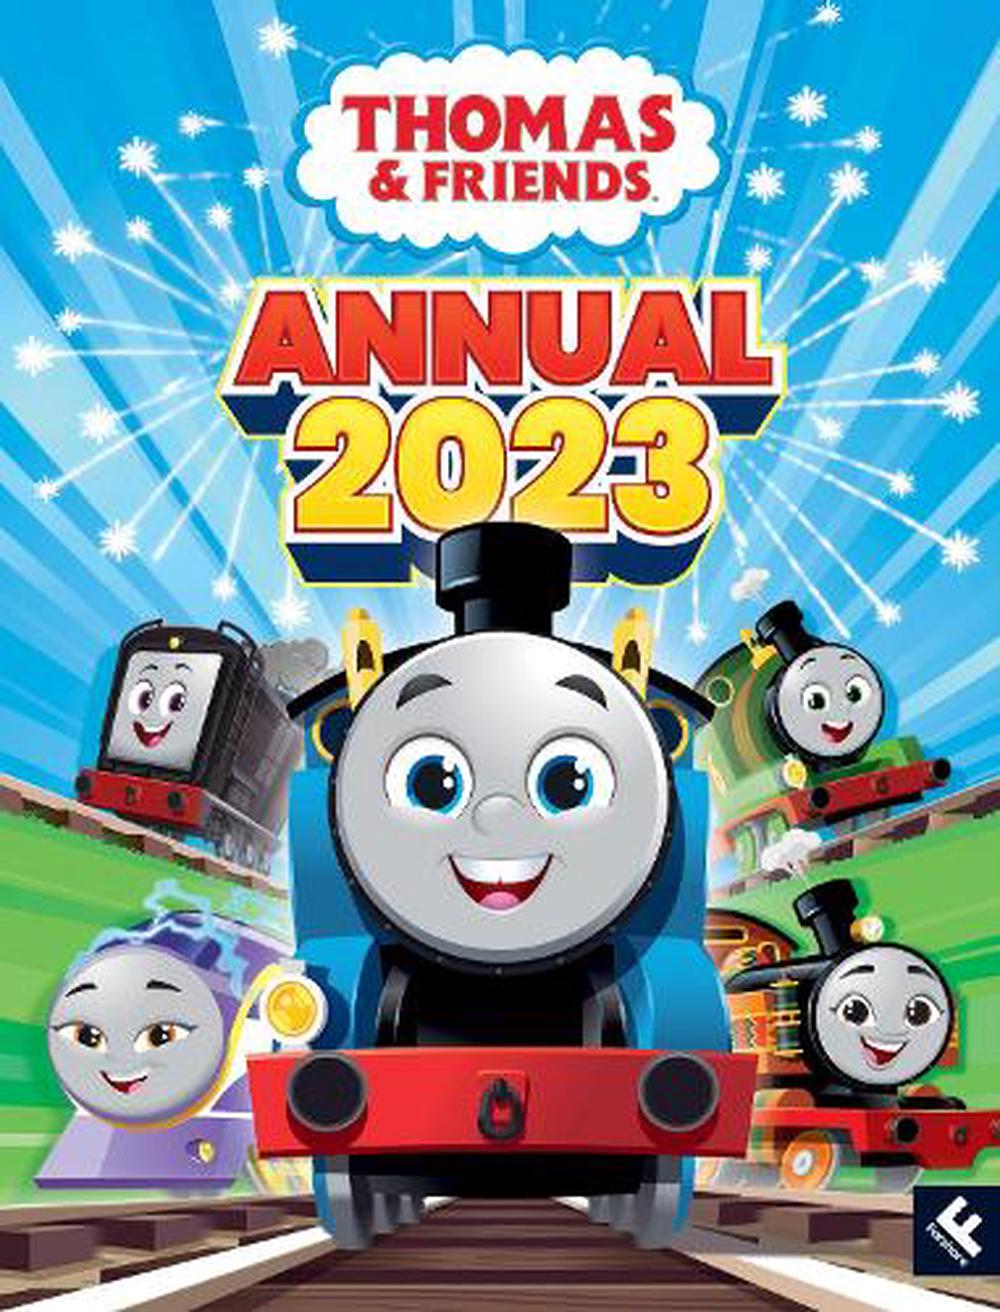 Thomas & Friends Annual 2023 by Thomas & Friends, Hardcover